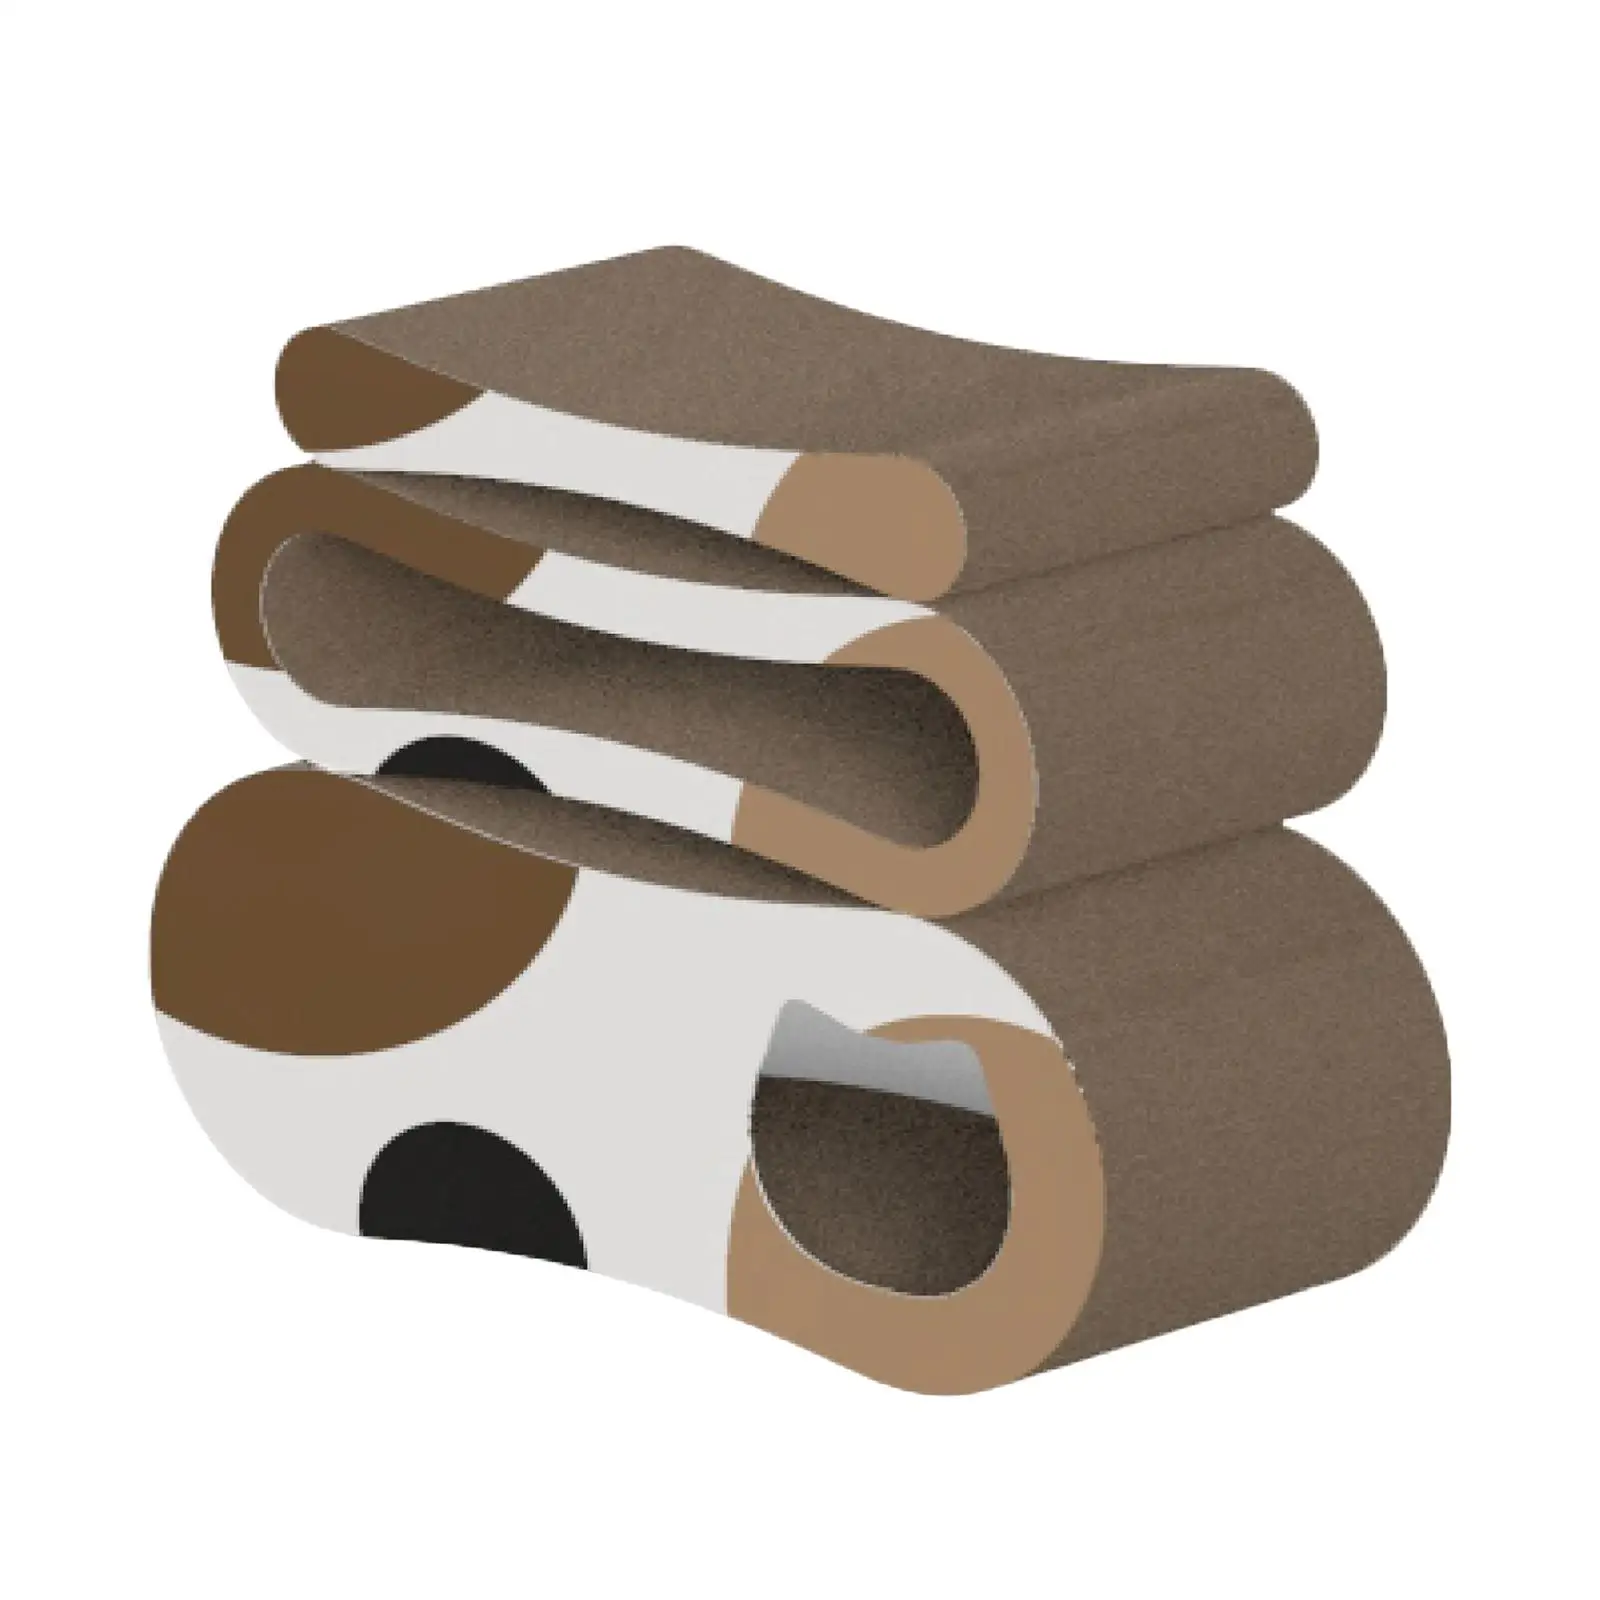 3Pcs Cat Cardboards Corrugated Scratcher Bed Supplies Claw Scratching Board for Claw Scratching Training Grinding Claws